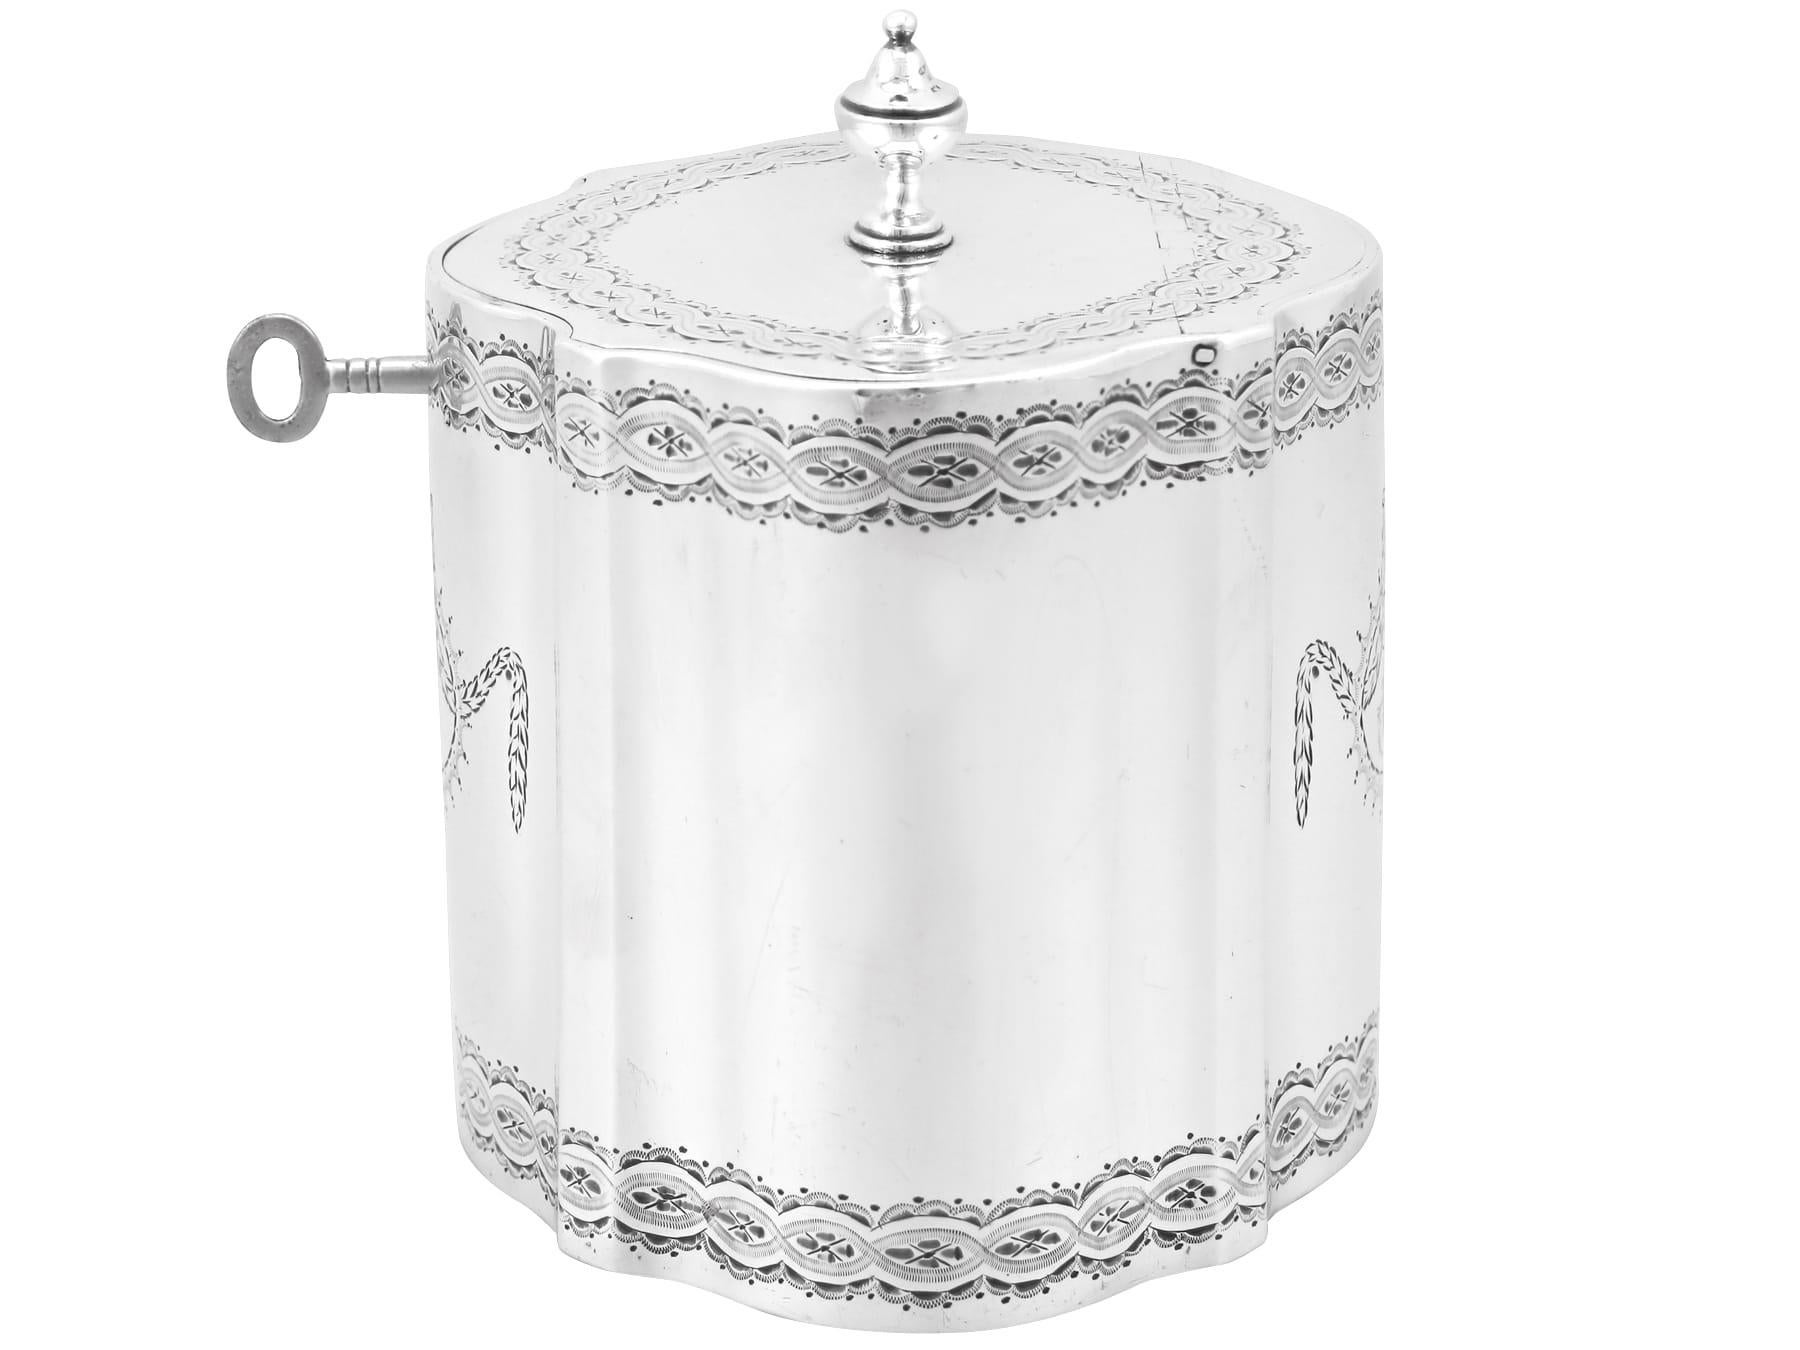 George III Antique 1782 Sterling Silver Locking Tea Caddy For Sale